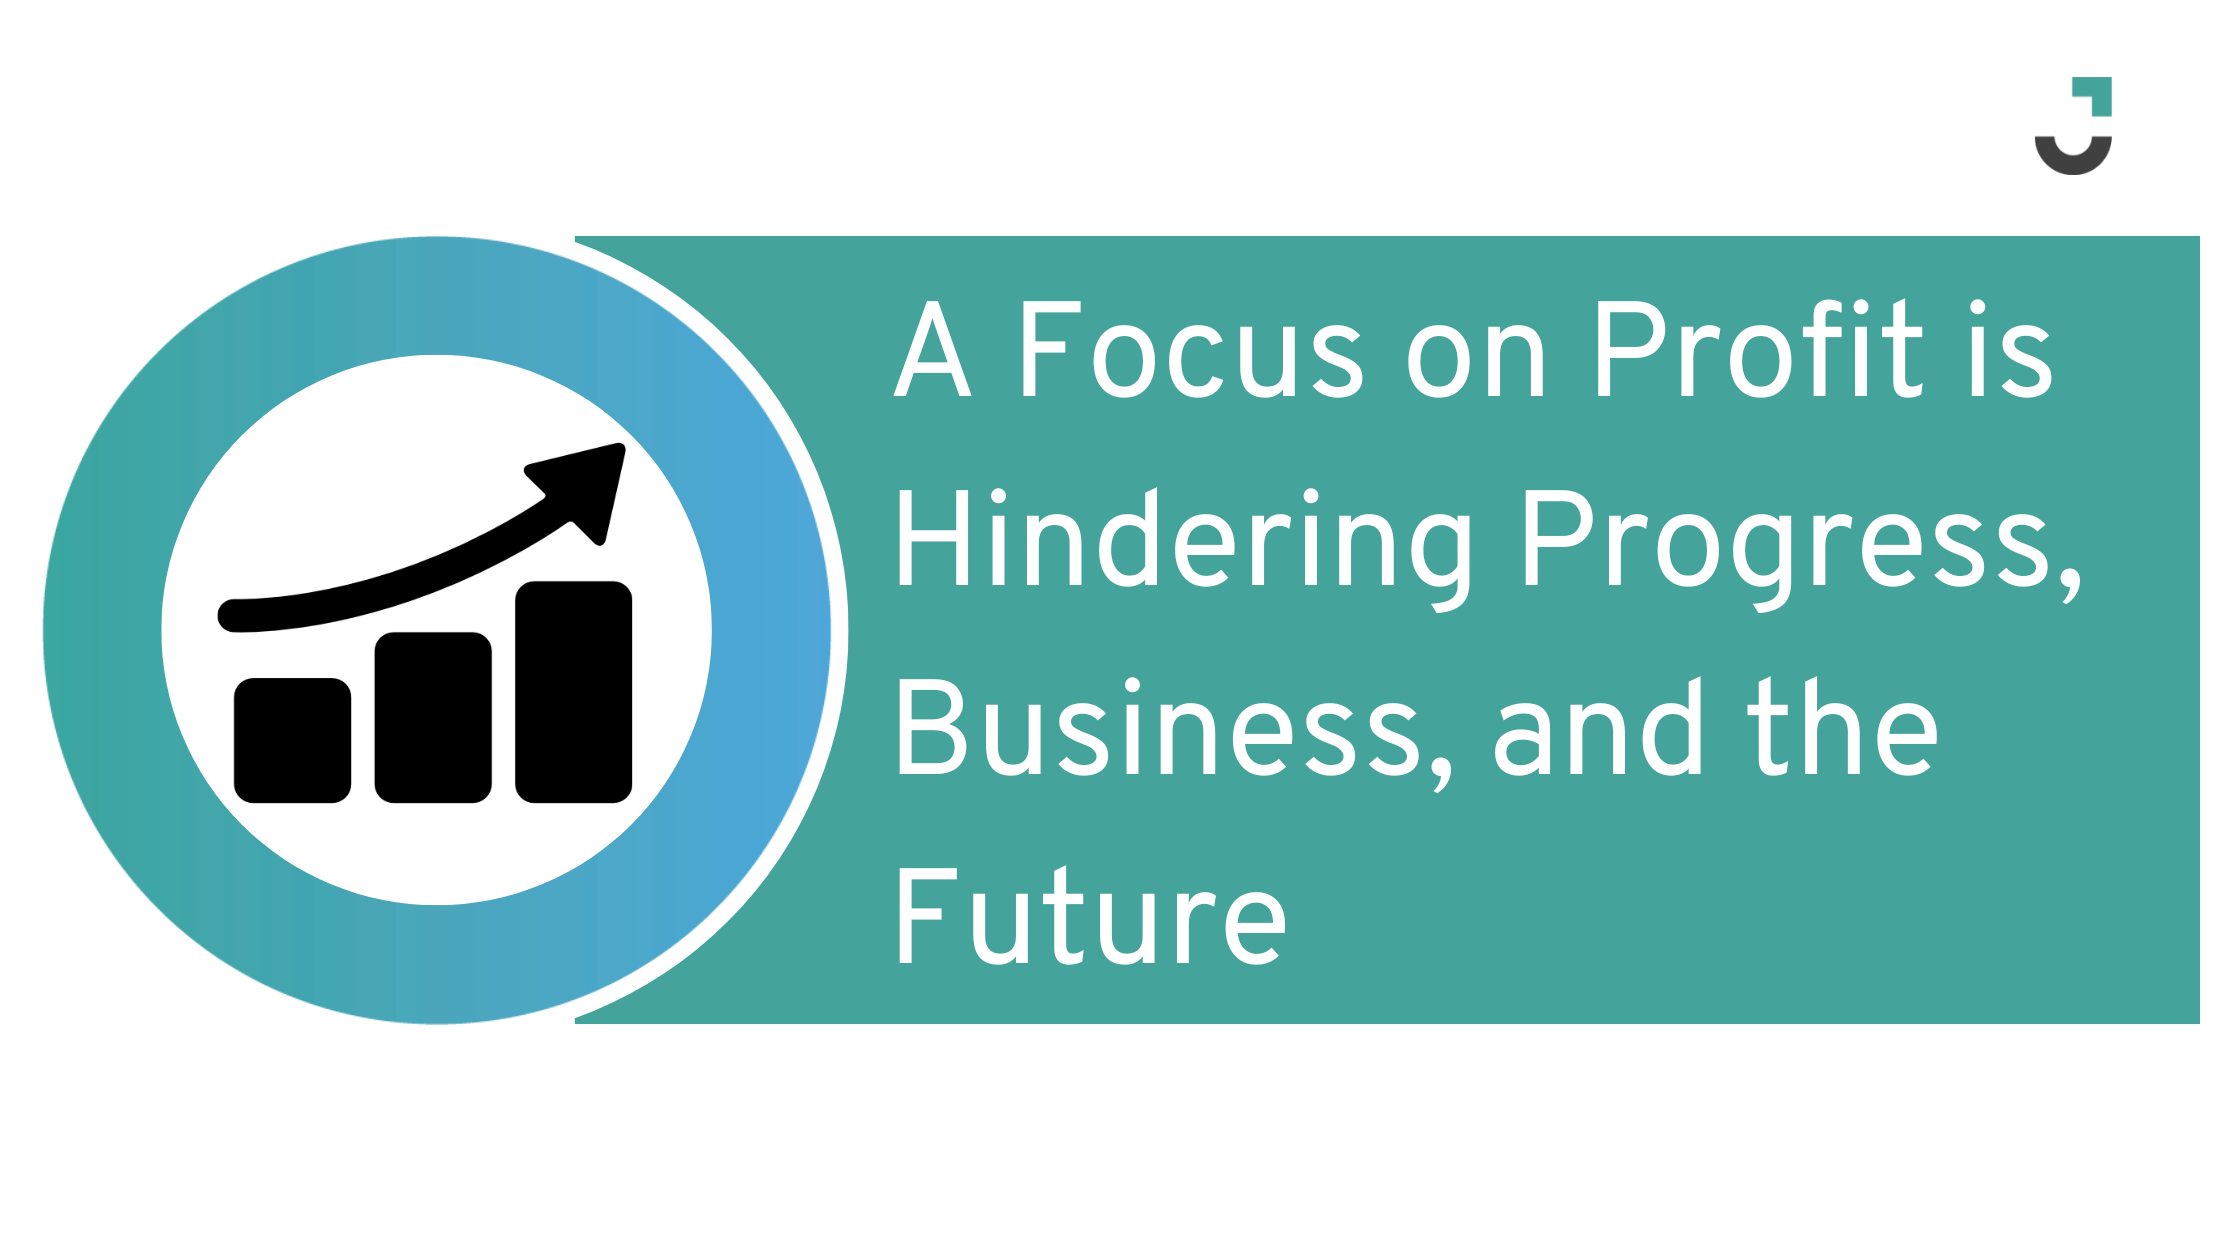 A Focus on Profit is Hindering Progress, Business, and the Future